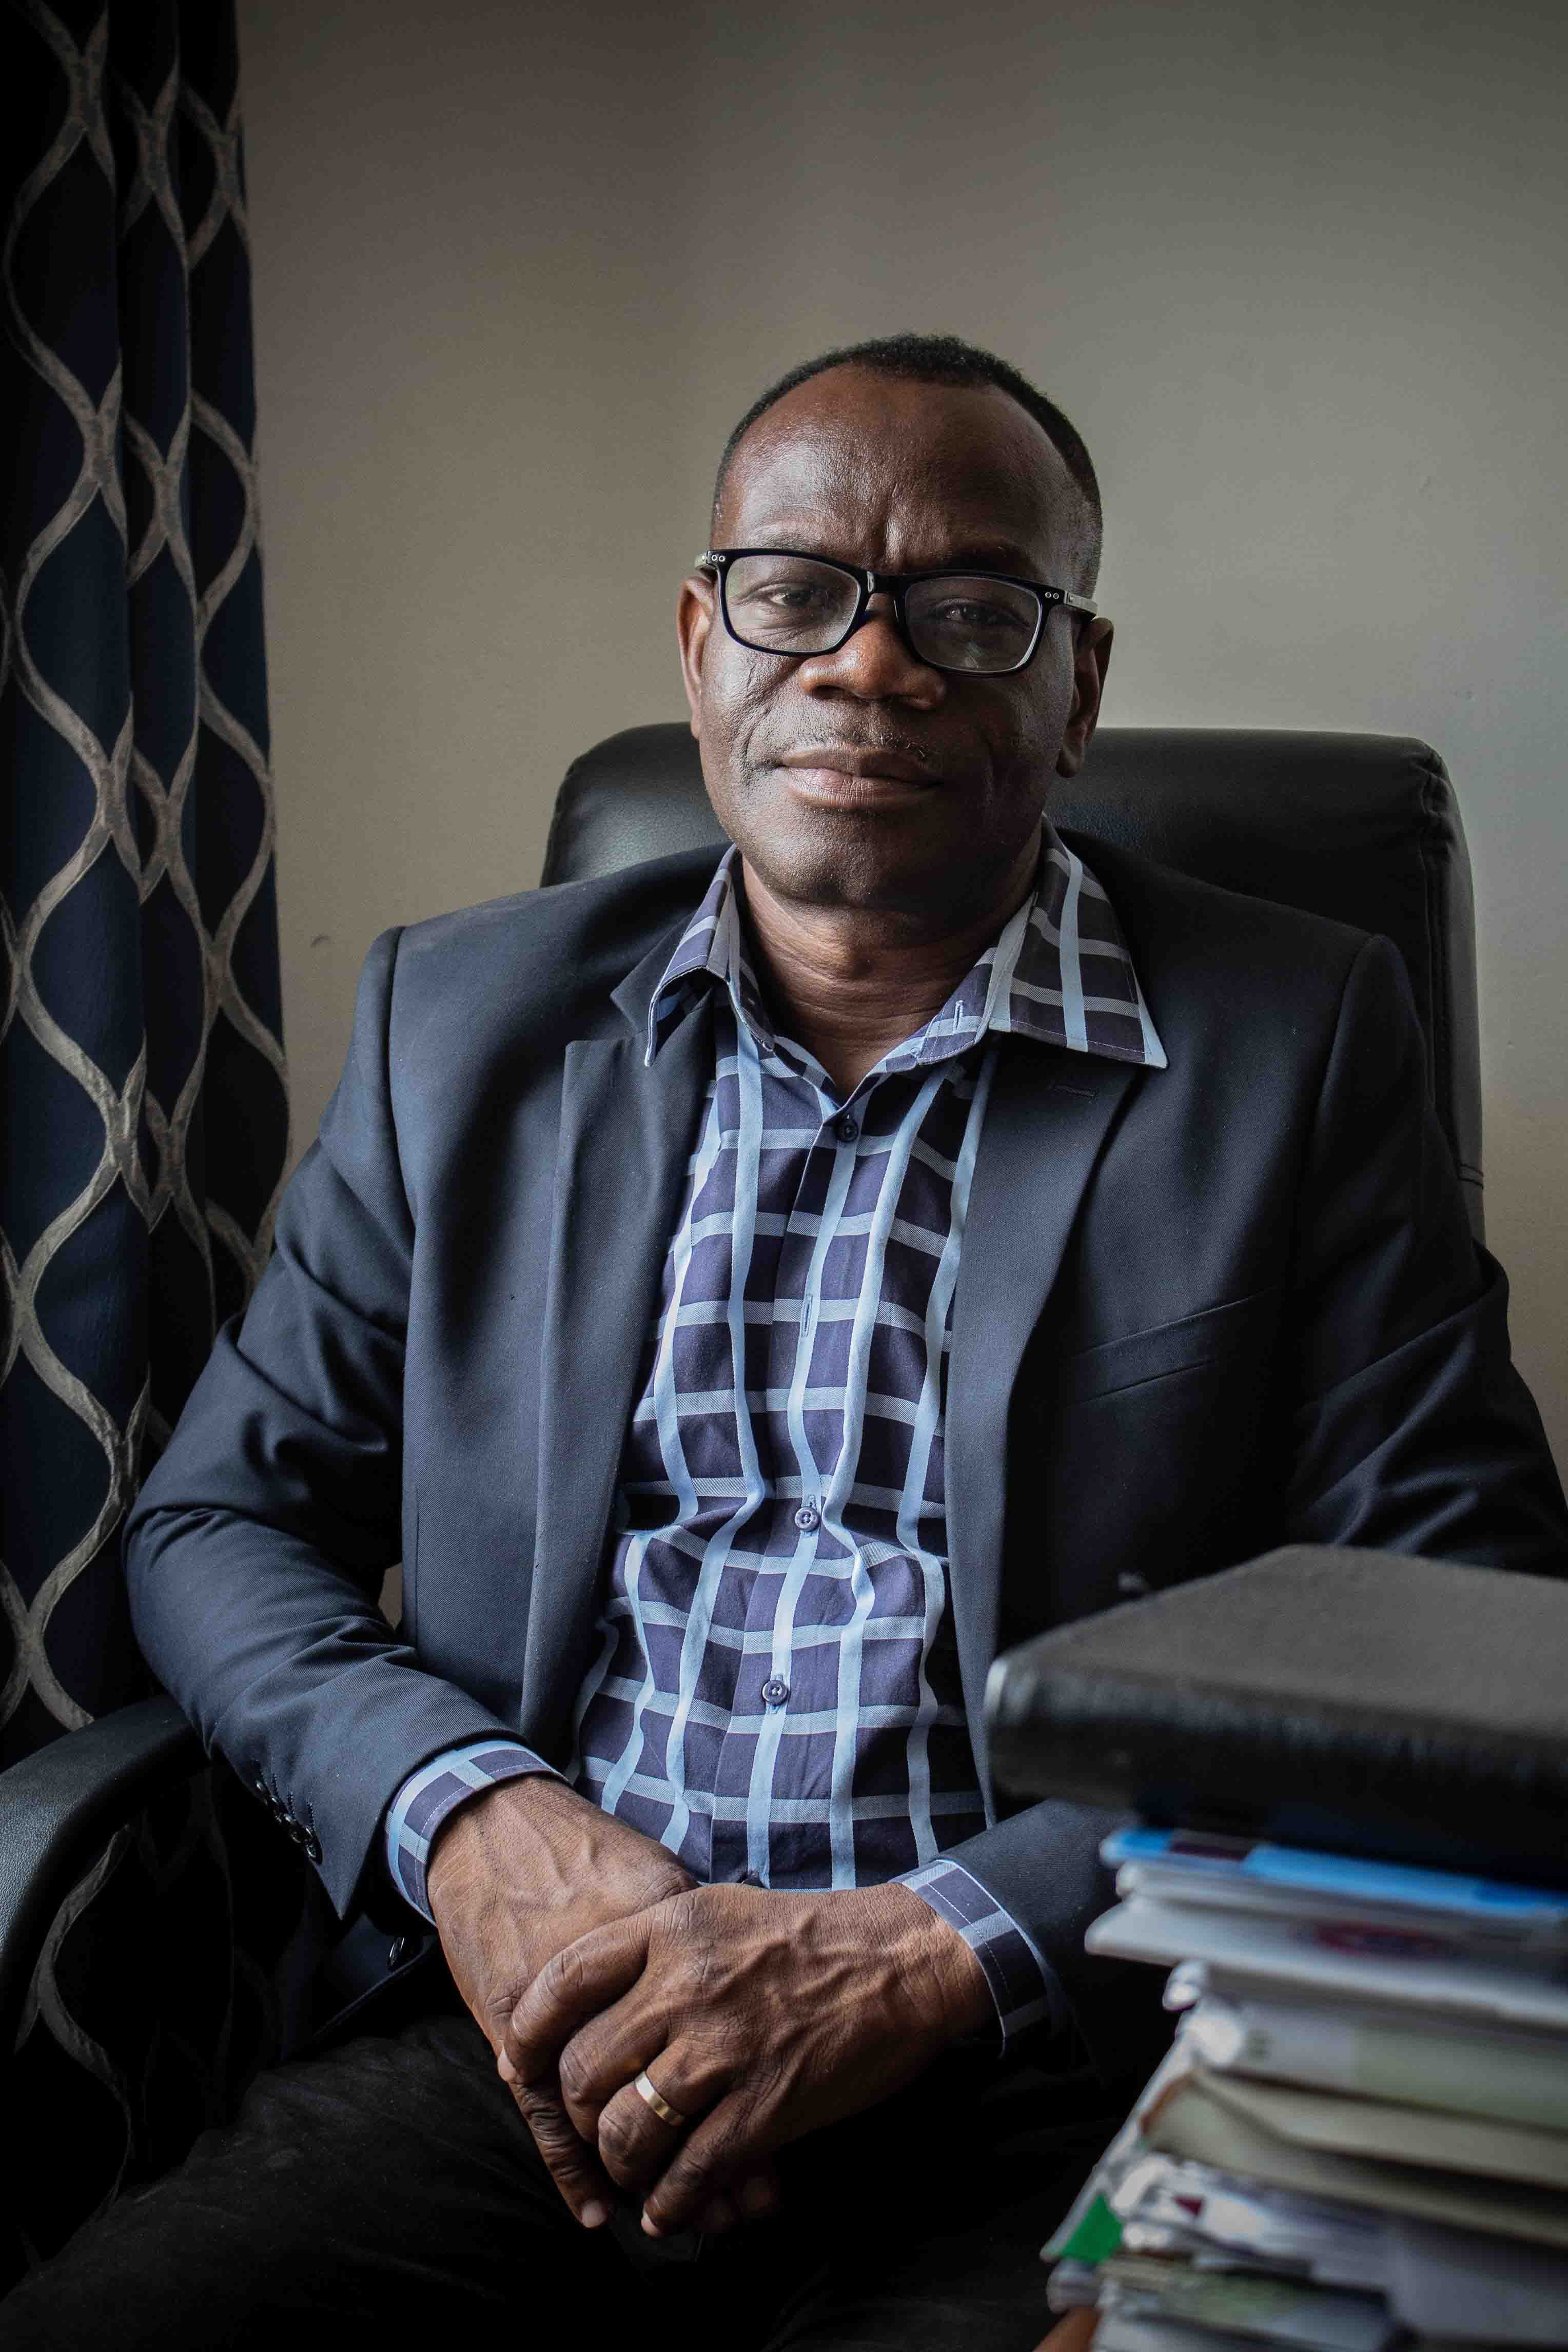 Richard Ampadu-Ameyaw, Ghana’s coordinator for the Open Forum on Agricultural Biotechnology in Africa, believes that training journalists and farming leaders about the science of GM food is the best way to dispel myths around it. Image by Ankur Paliwal. Ghana, 2019.